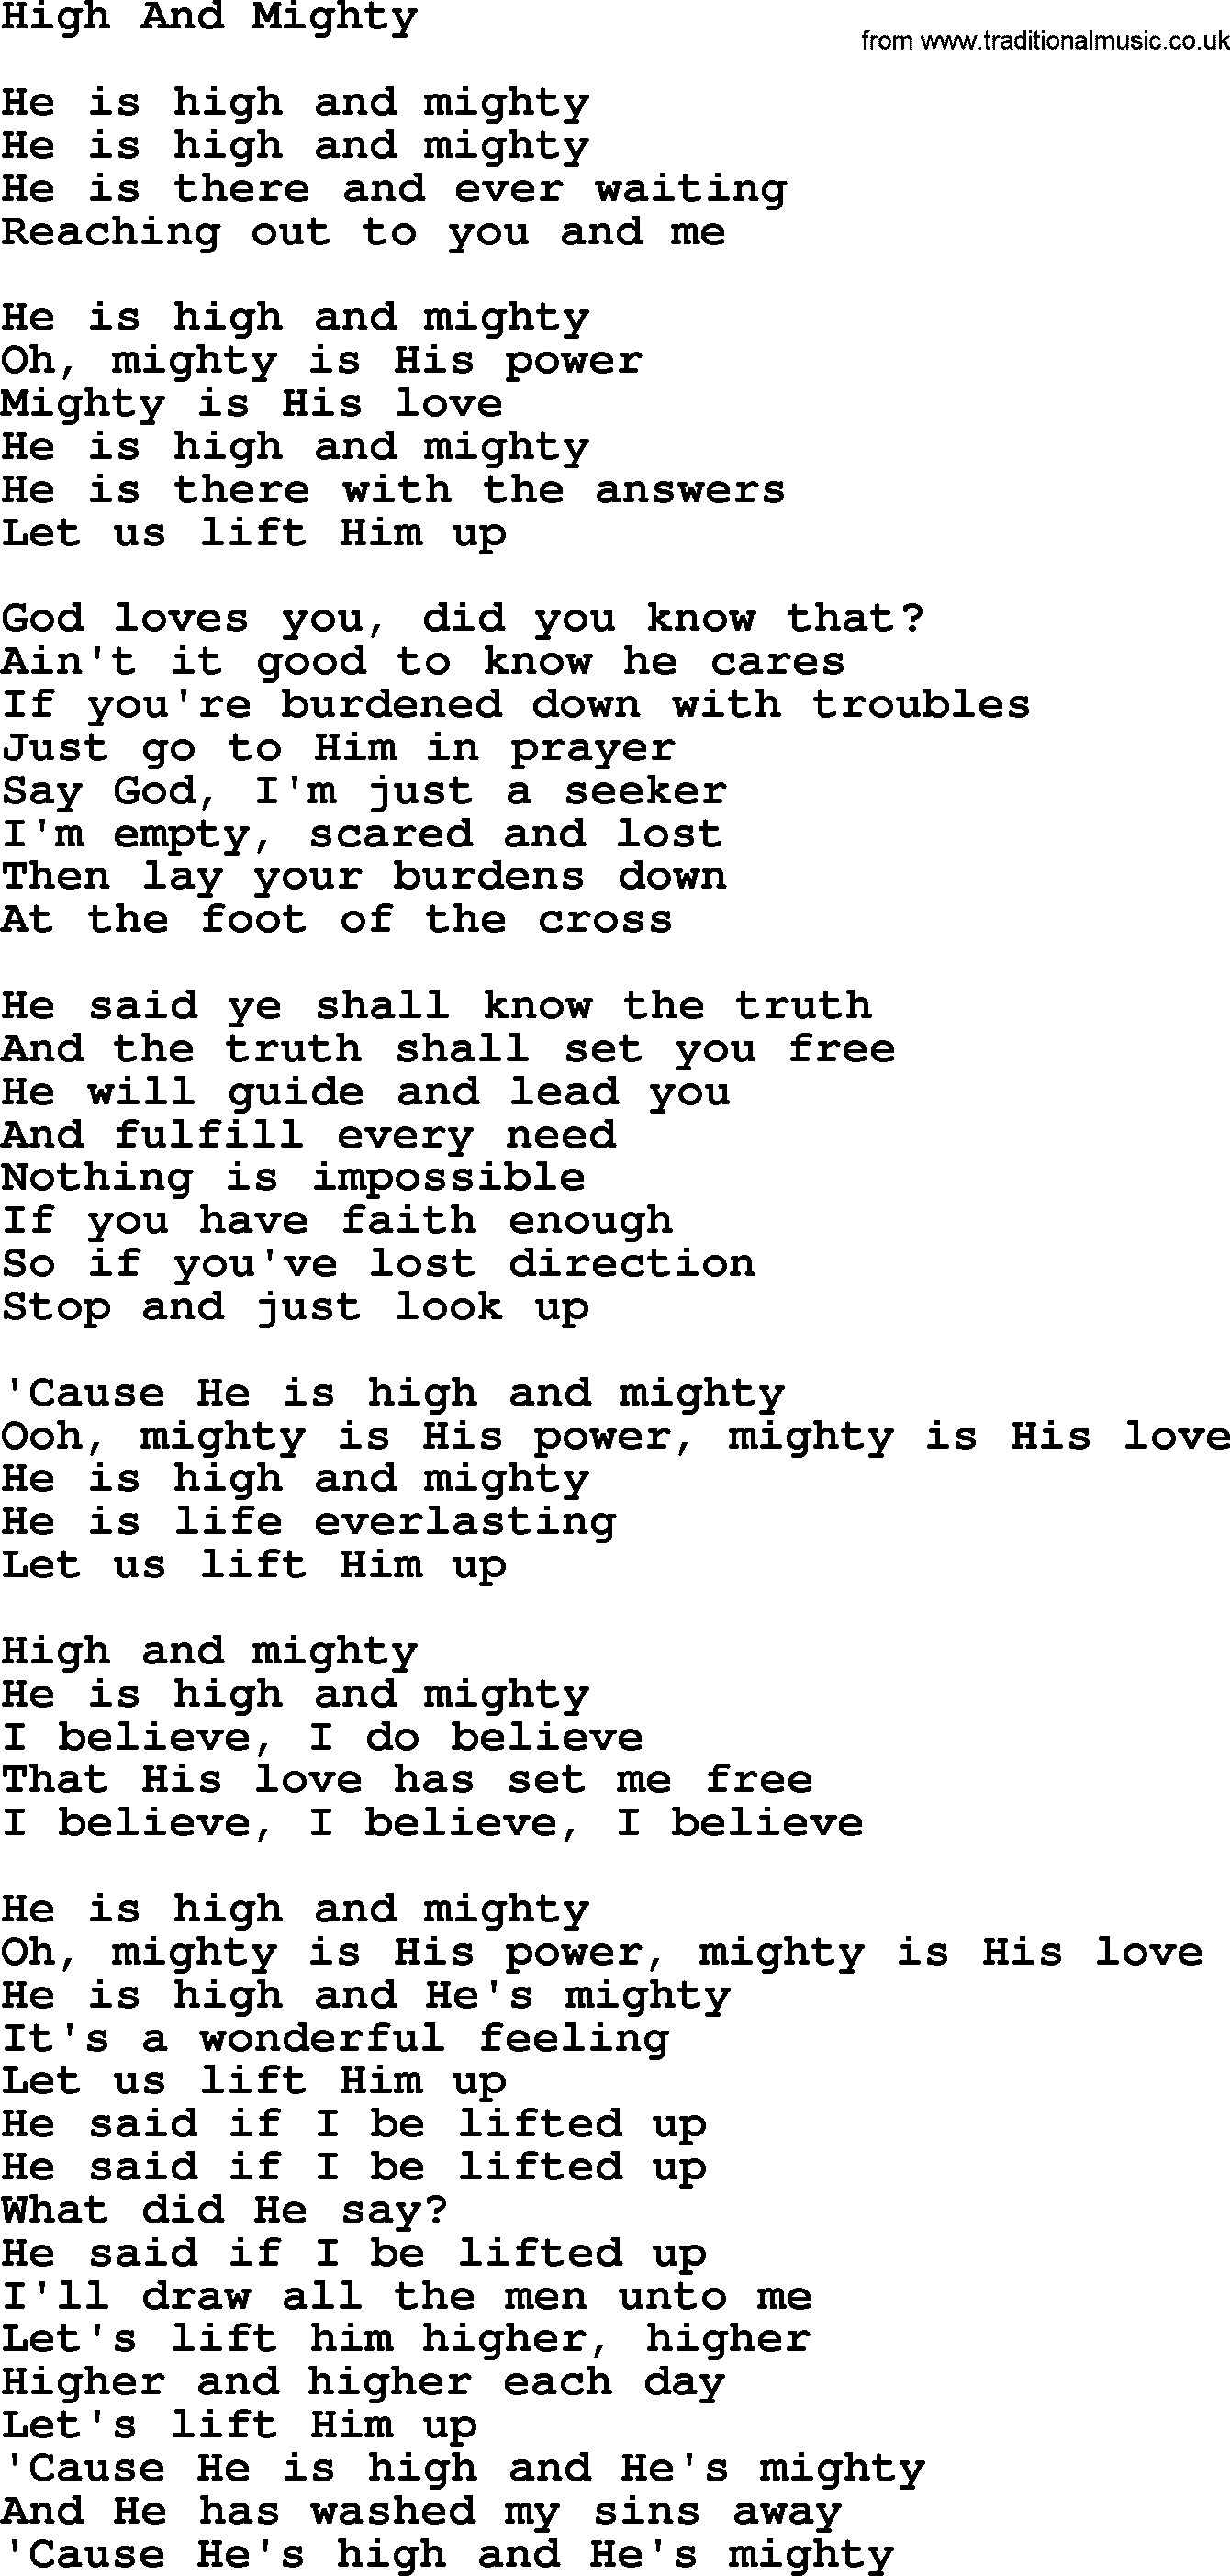 Dolly Parton song High And Mighty.txt lyrics